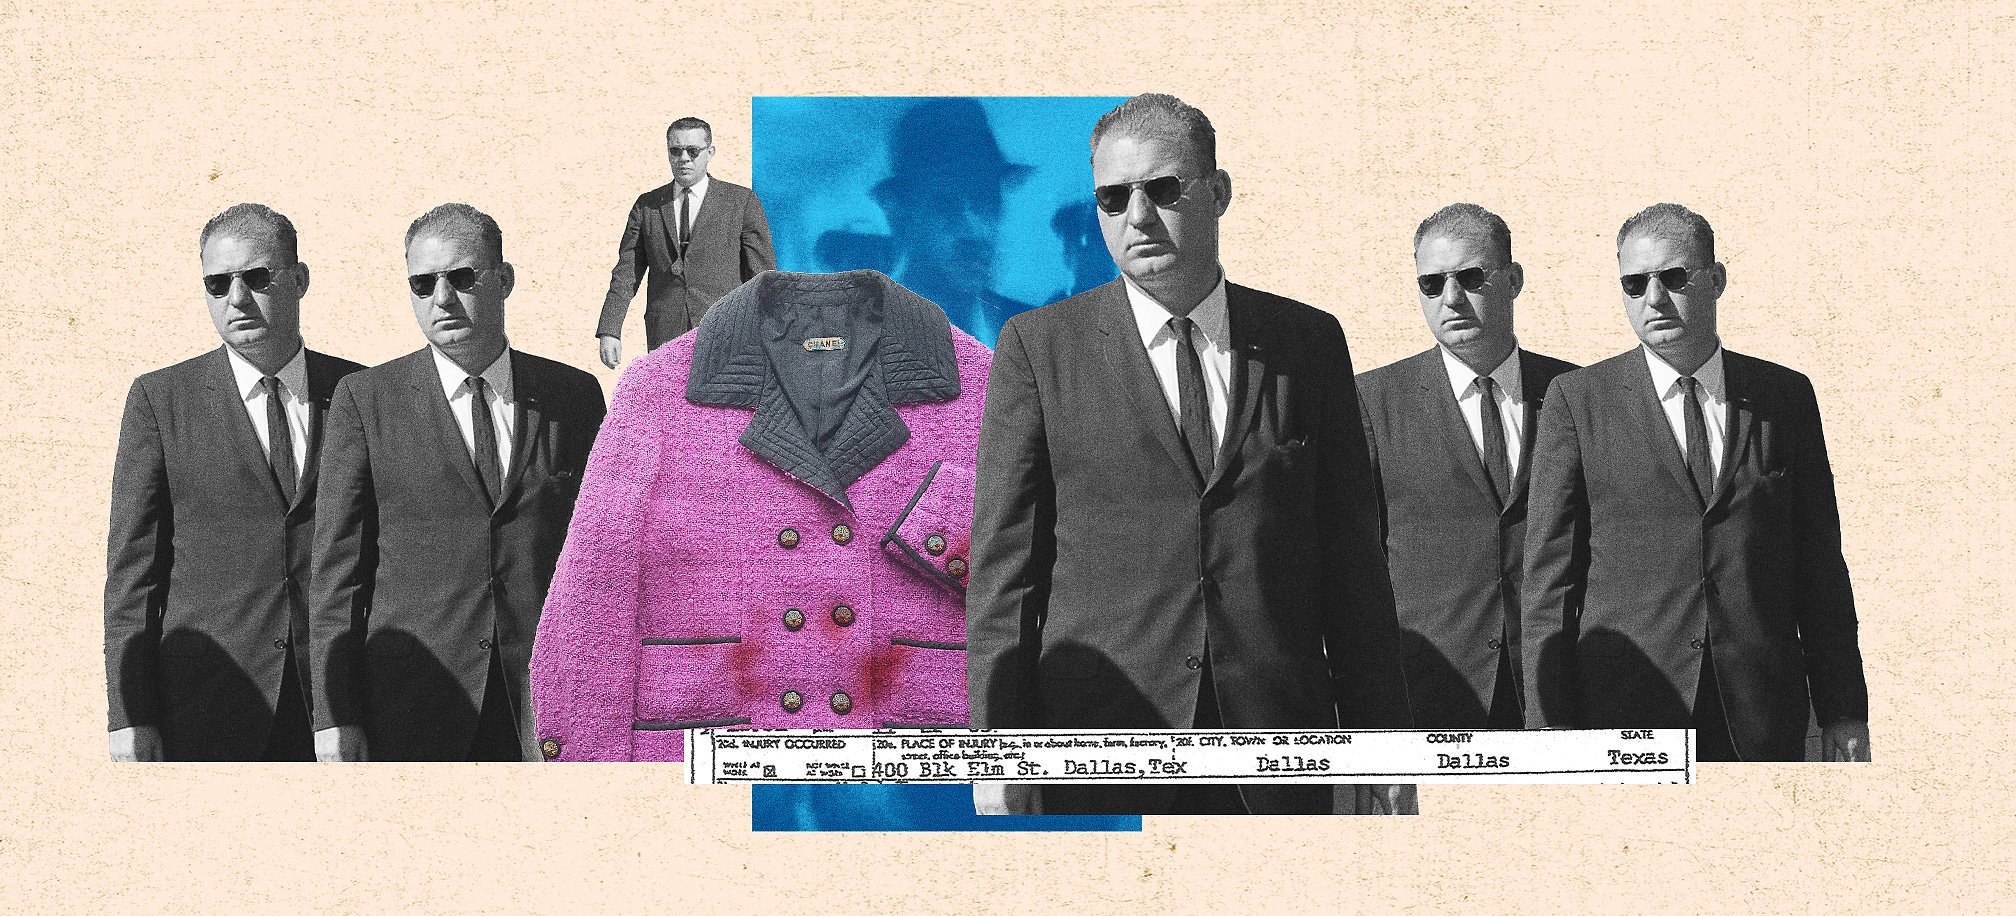 Photos of Secret Service agents wearing dark suits and sunglassess are repeated across a collage of photos that include a photo of the pink Chanel suit Jacqueline Kennedy was wearing when the President was shot and a photo of a man wearing a dark suit and hat.